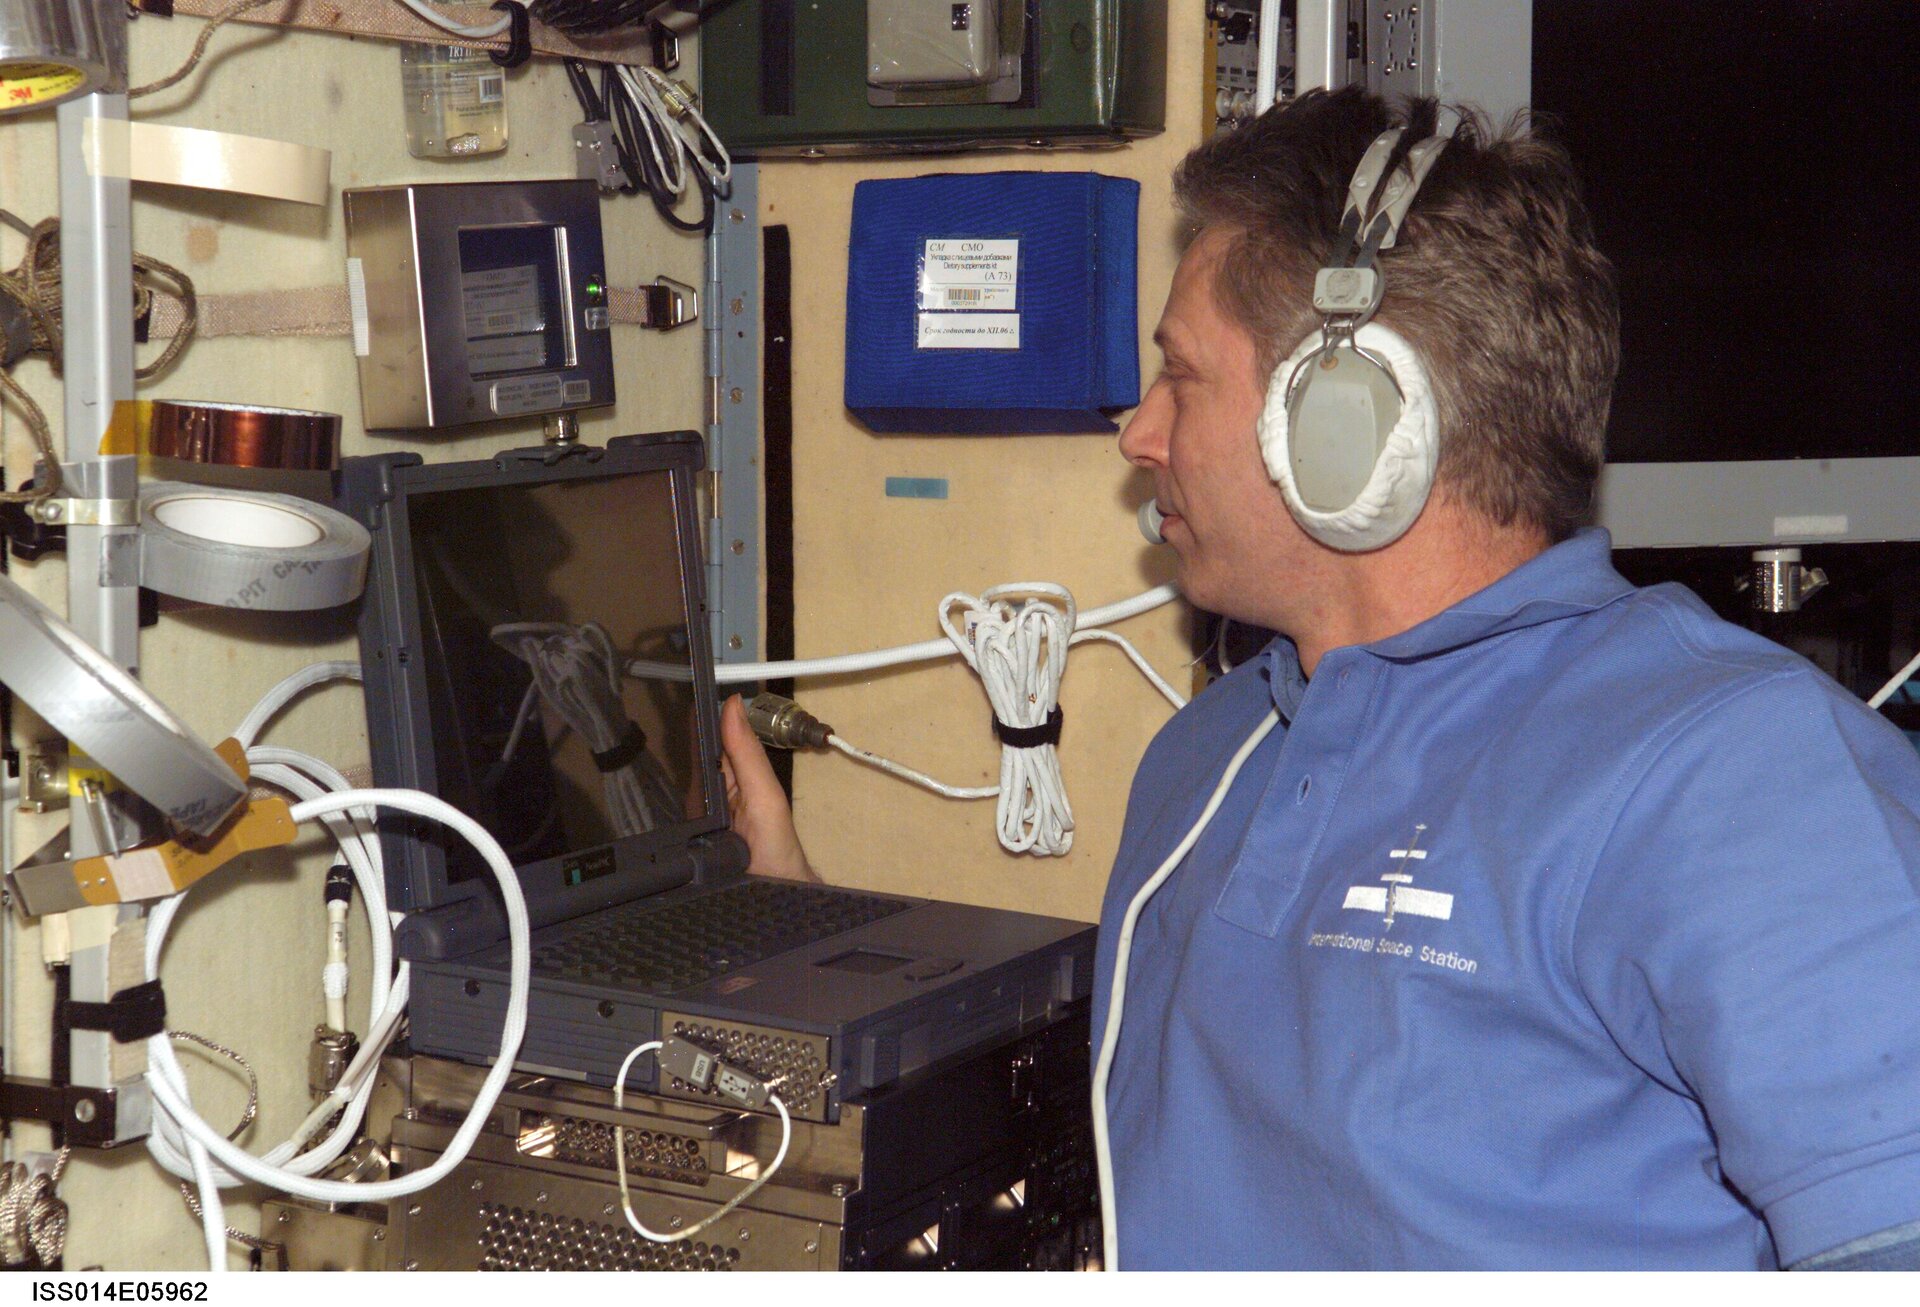 Thomas Reiter wears a communication system headset while using a computer in the Zvezda